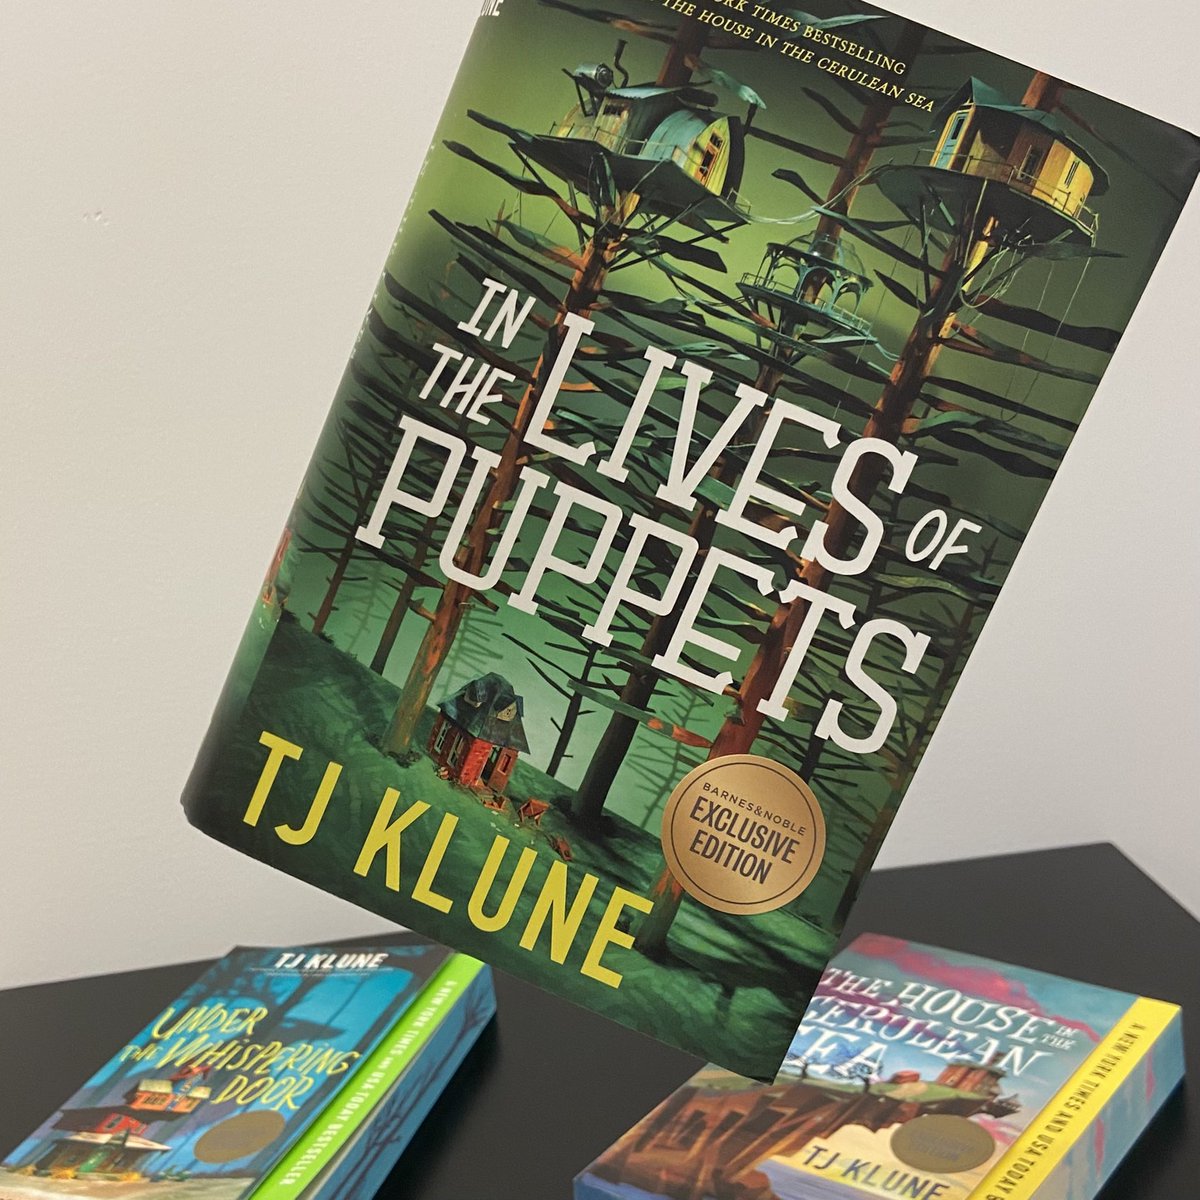 Some big new releases this week, including the latest from Emily Henry and TJ Klune - and we have exclusive editions of both! Will you be reading these?